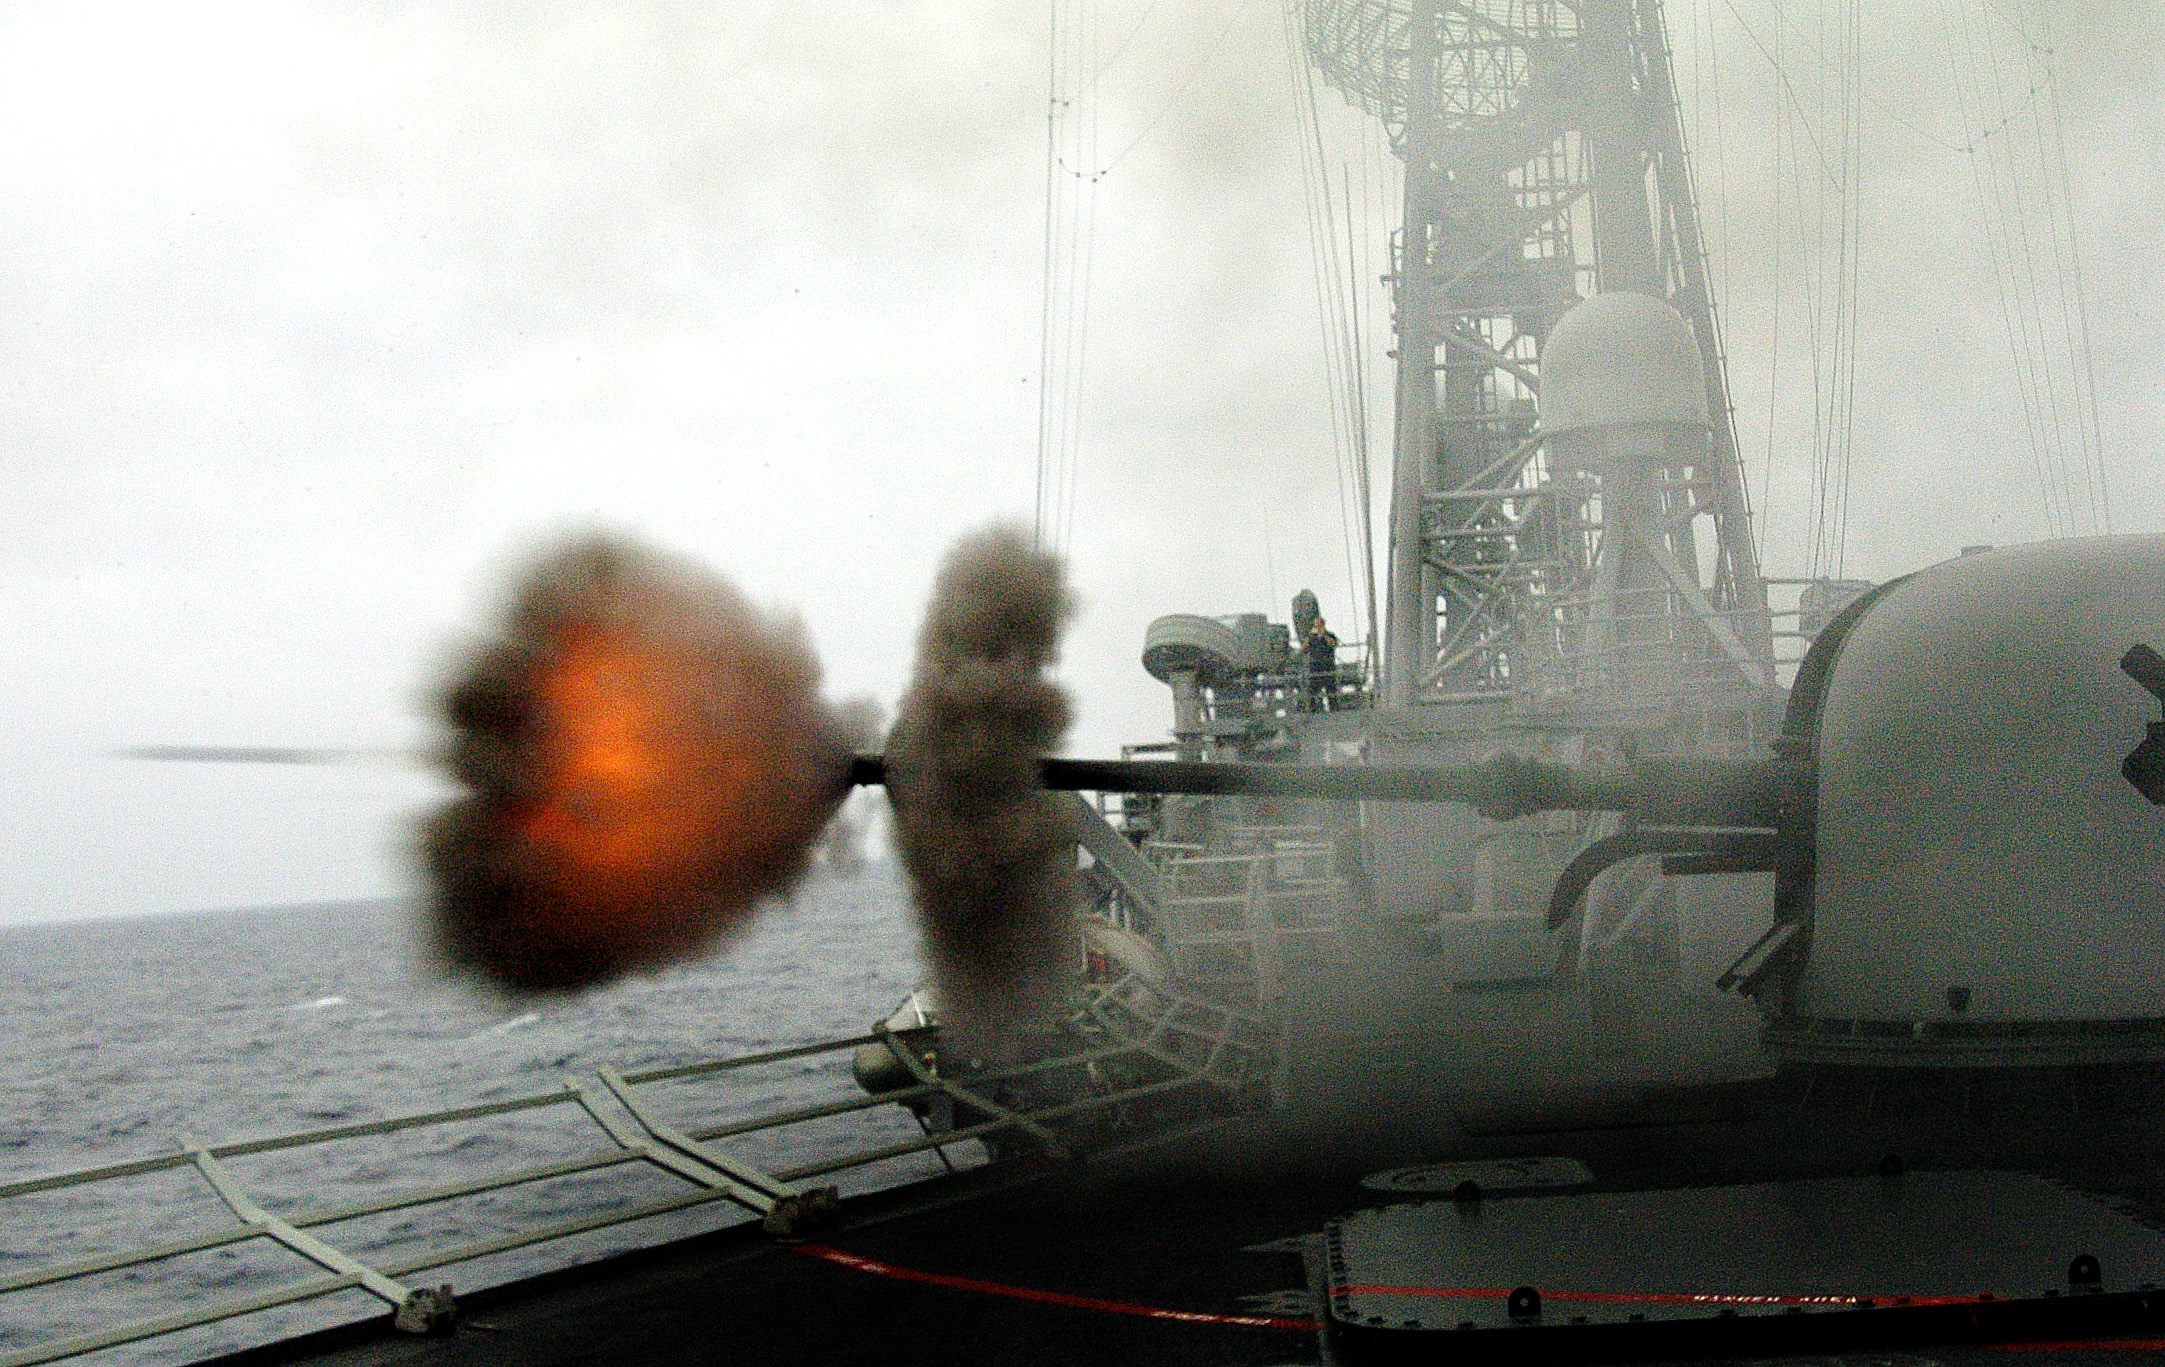 US_Navy_040714-N-1464F-001_A_round_is_fired_from_the_ship%27s_MK-75_76mm_gun_aboard_the_guided_missile_frigate_USS_Crommelin_%28FFG_37%29.jpg